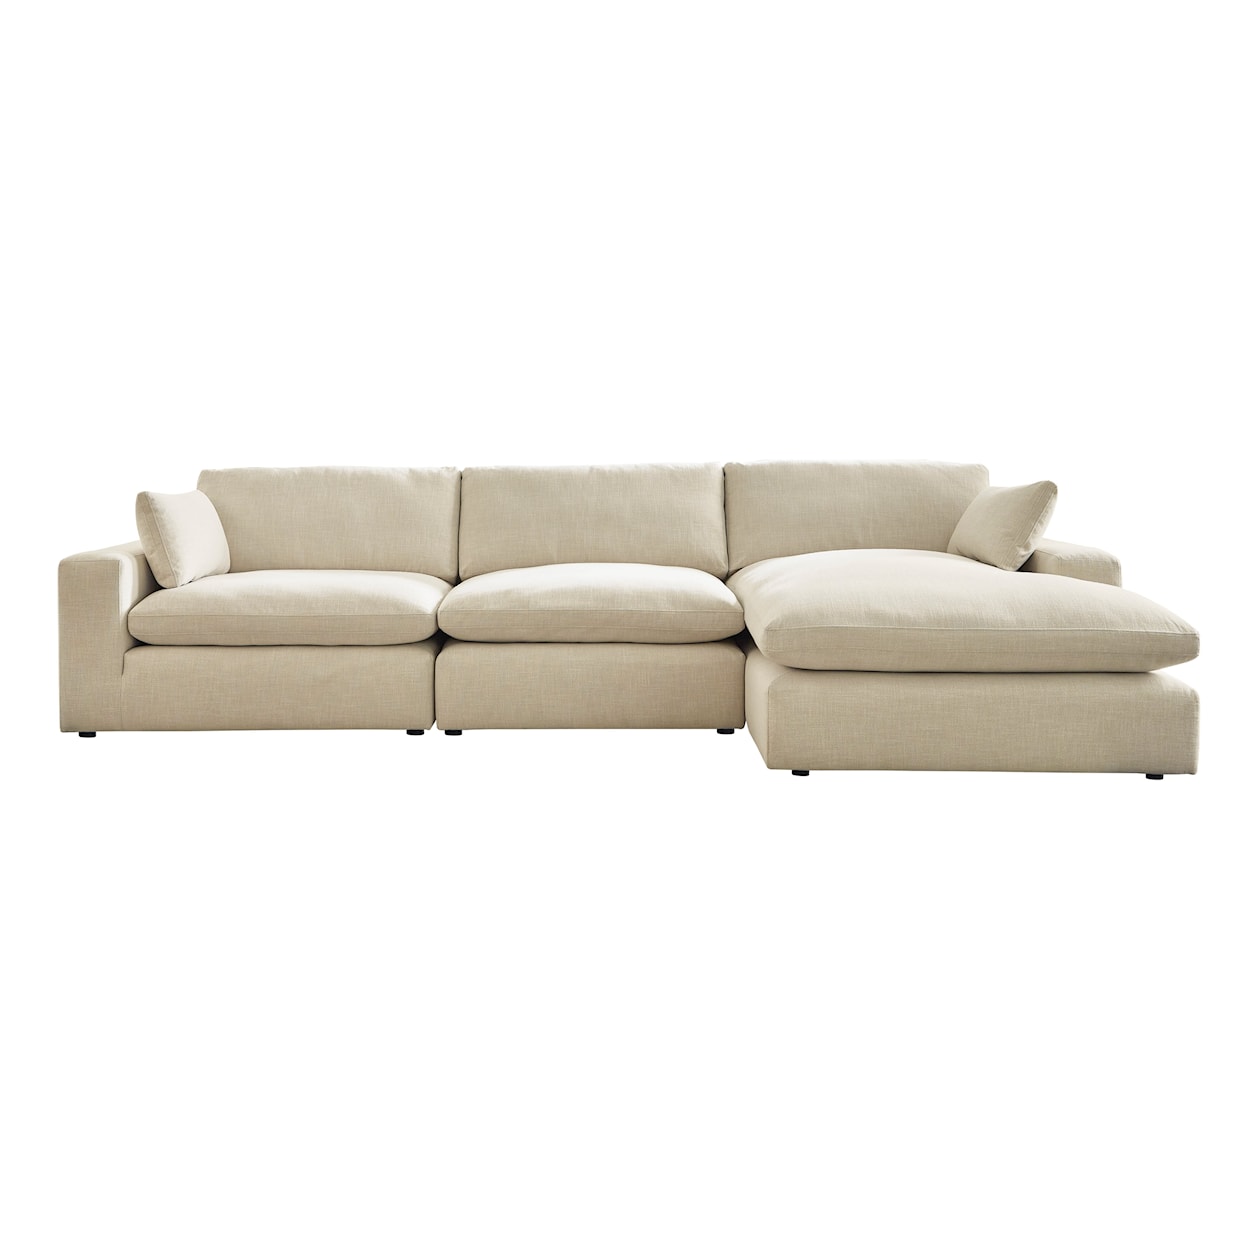 Michael Alan Select Elyza 3-Piece Modular Sectional with Chaise